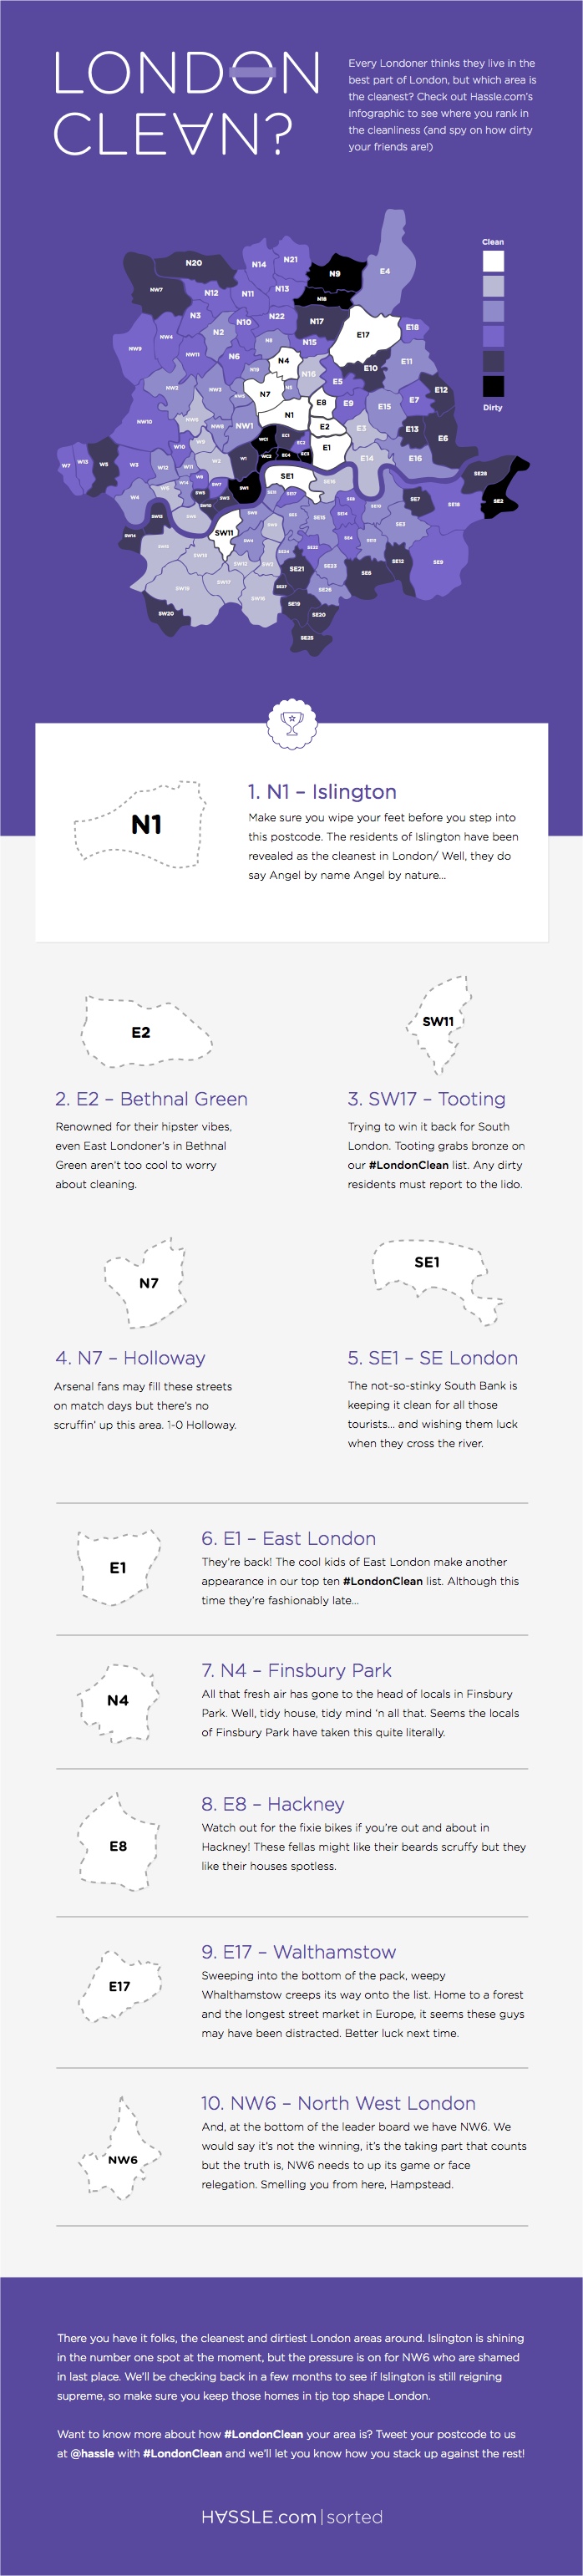 blog-infographic-cleanest-areas